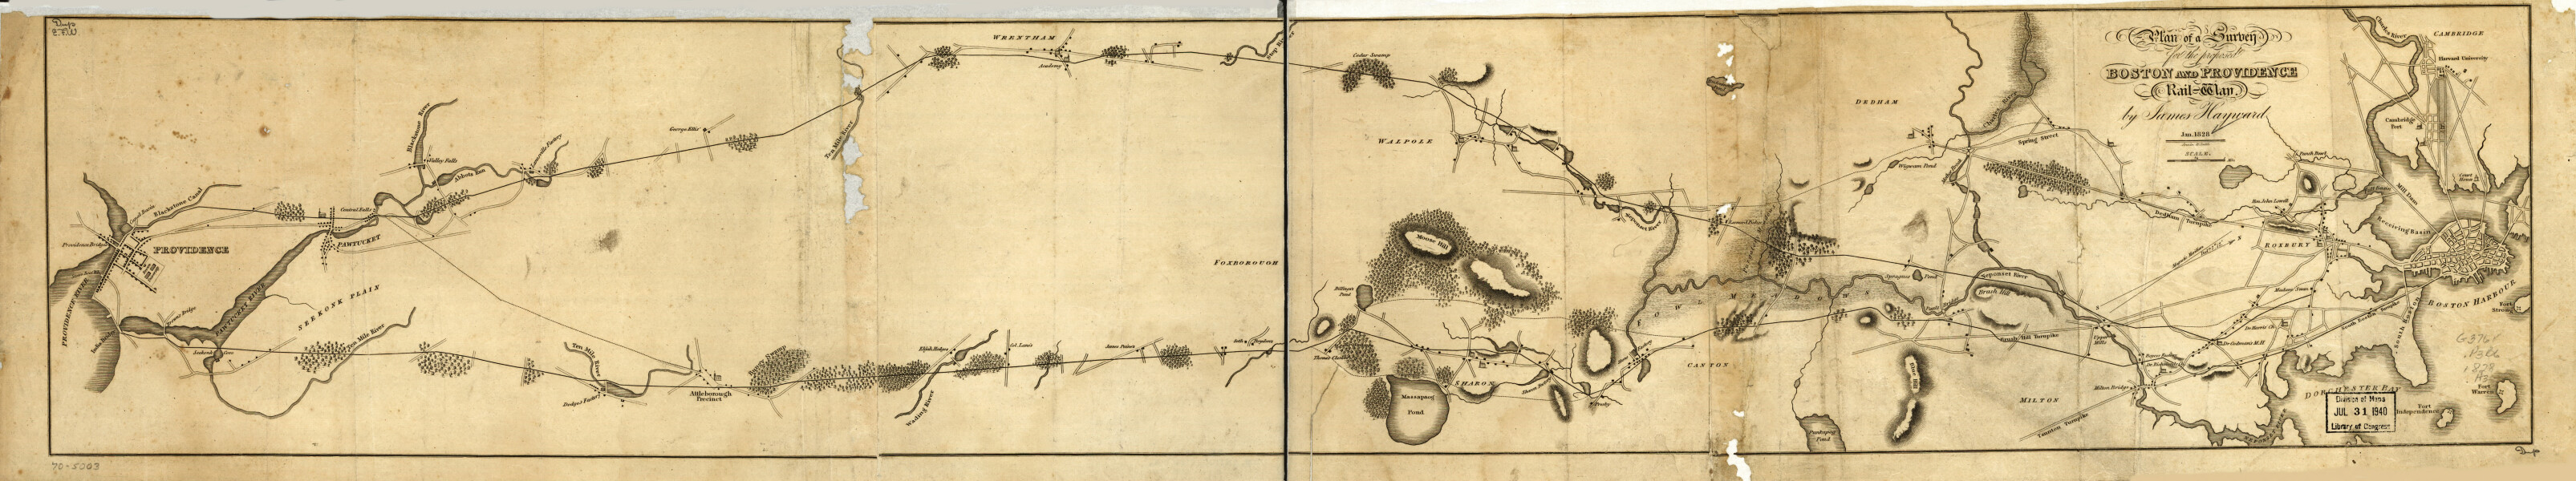 E72 - Plan of a Survey for the Proposed Boston and Providence Rail-Way - James Hayward - 1828